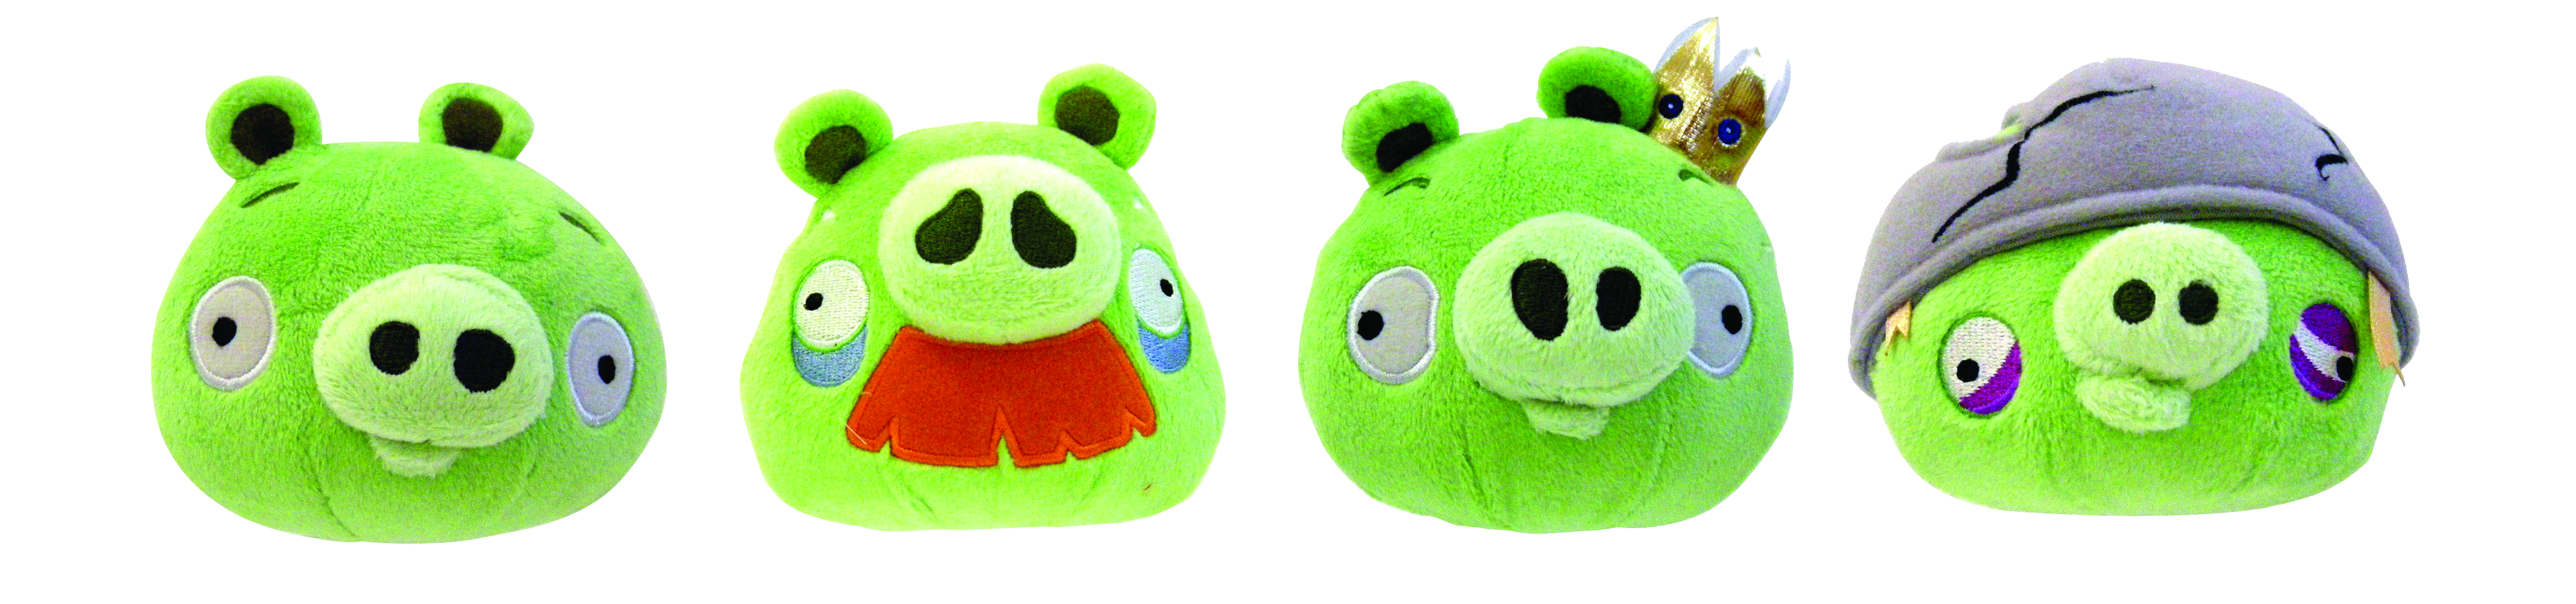 angry birds pig toy